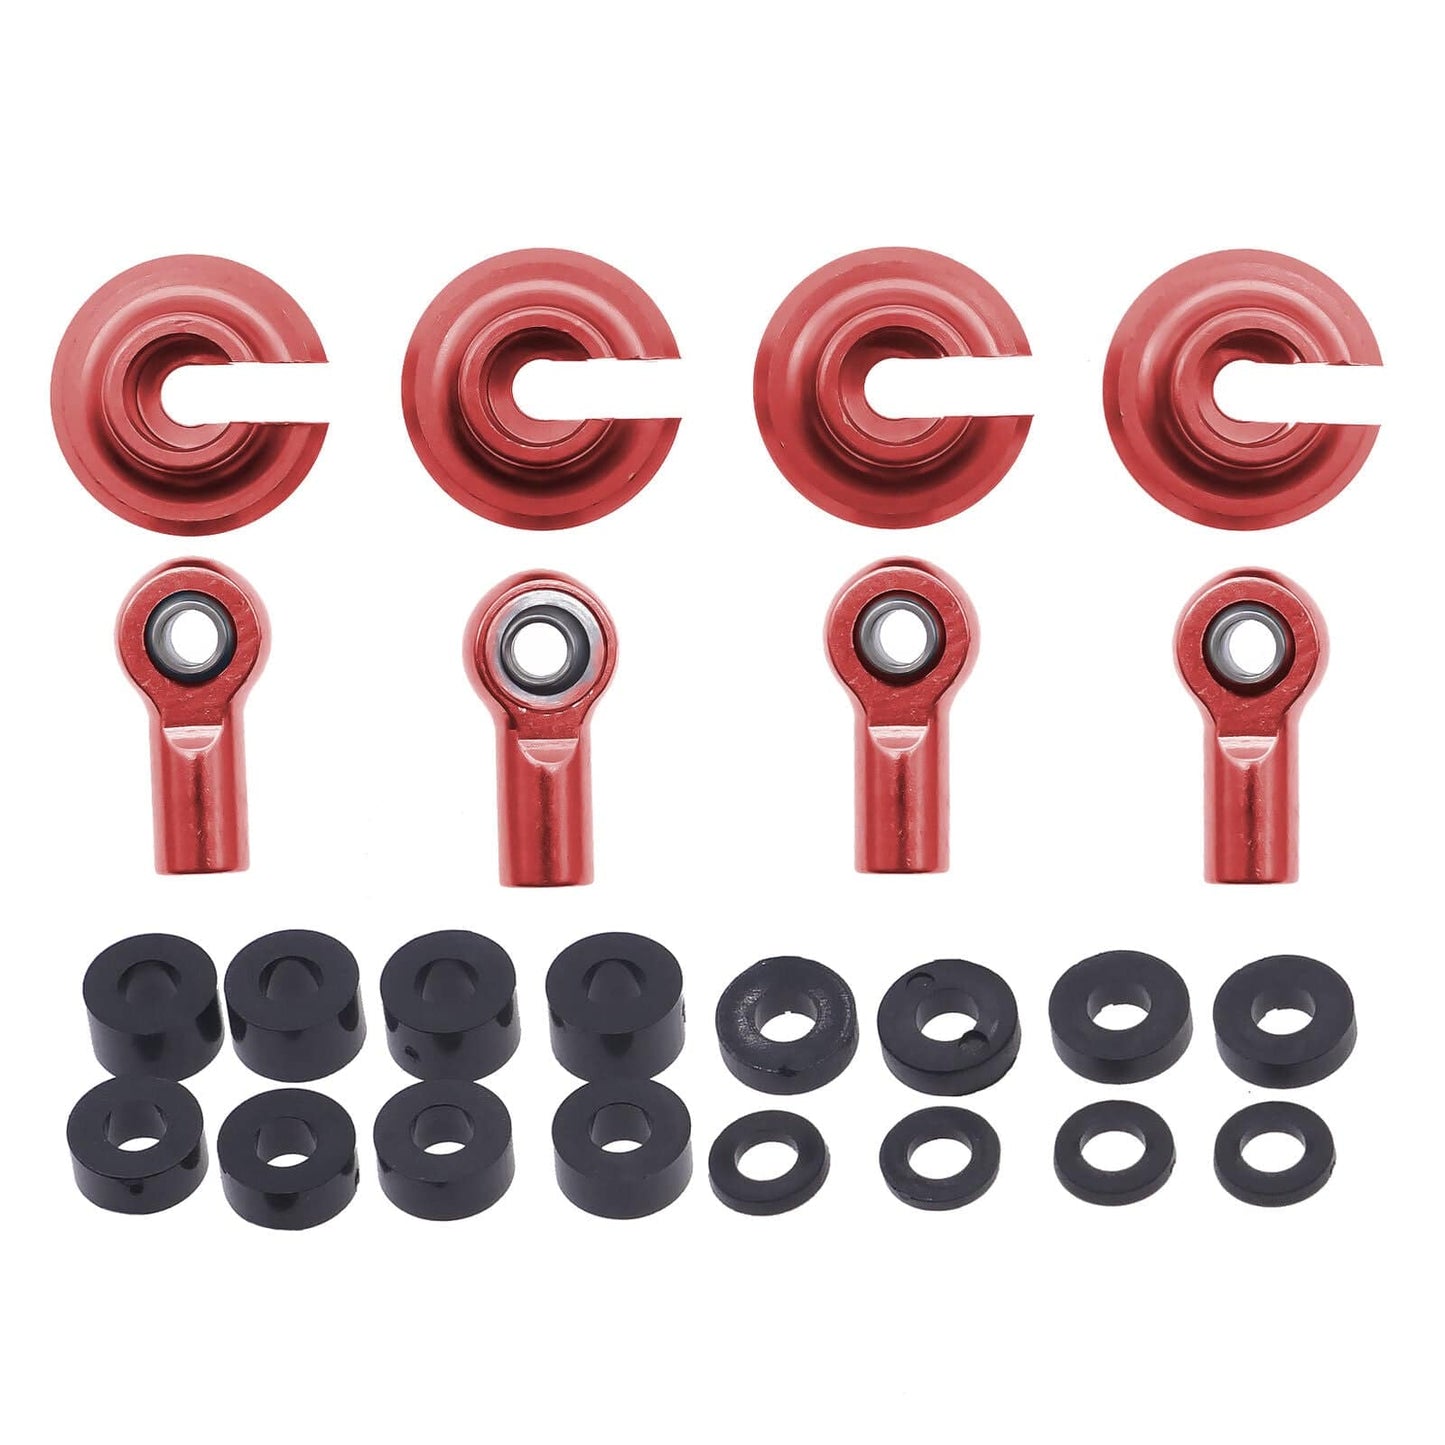 RCAWD ECX UPGRADE PARTS shock end,spring cup clip RCAWD Aluminum CNC DIY Upgrade Hop-up parts For 1-10 ECX 2WD Series Ruckus AMP red